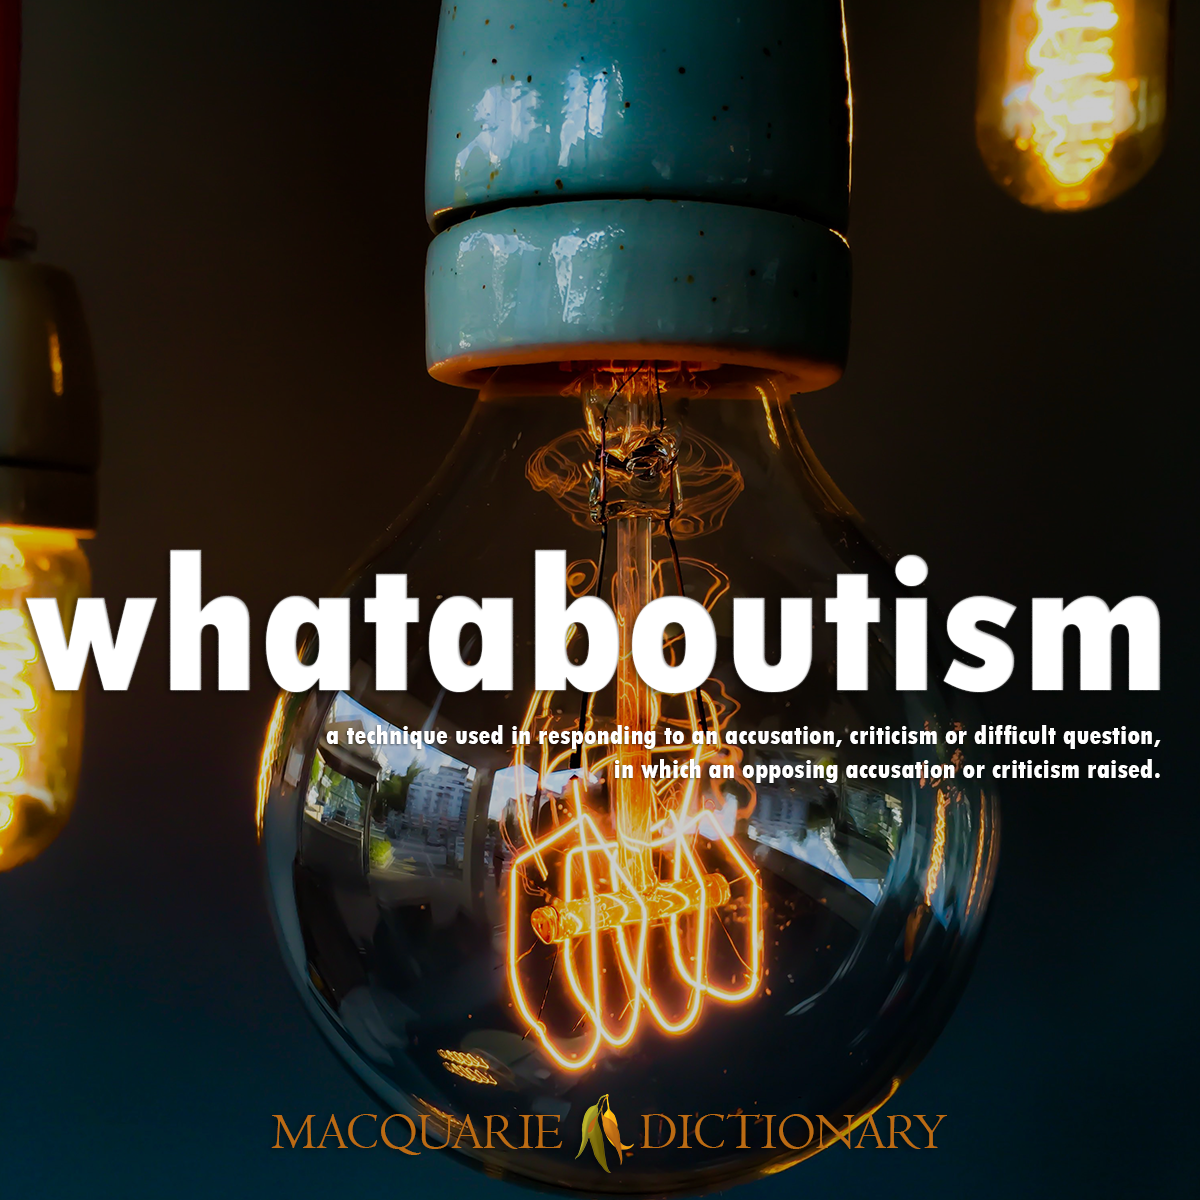 Image of Macquarie Dictionary Word of the Year whataboutism a technique used in responding to an accusation, criticism or difficult question, in which an opposing accusation or criticism raised.